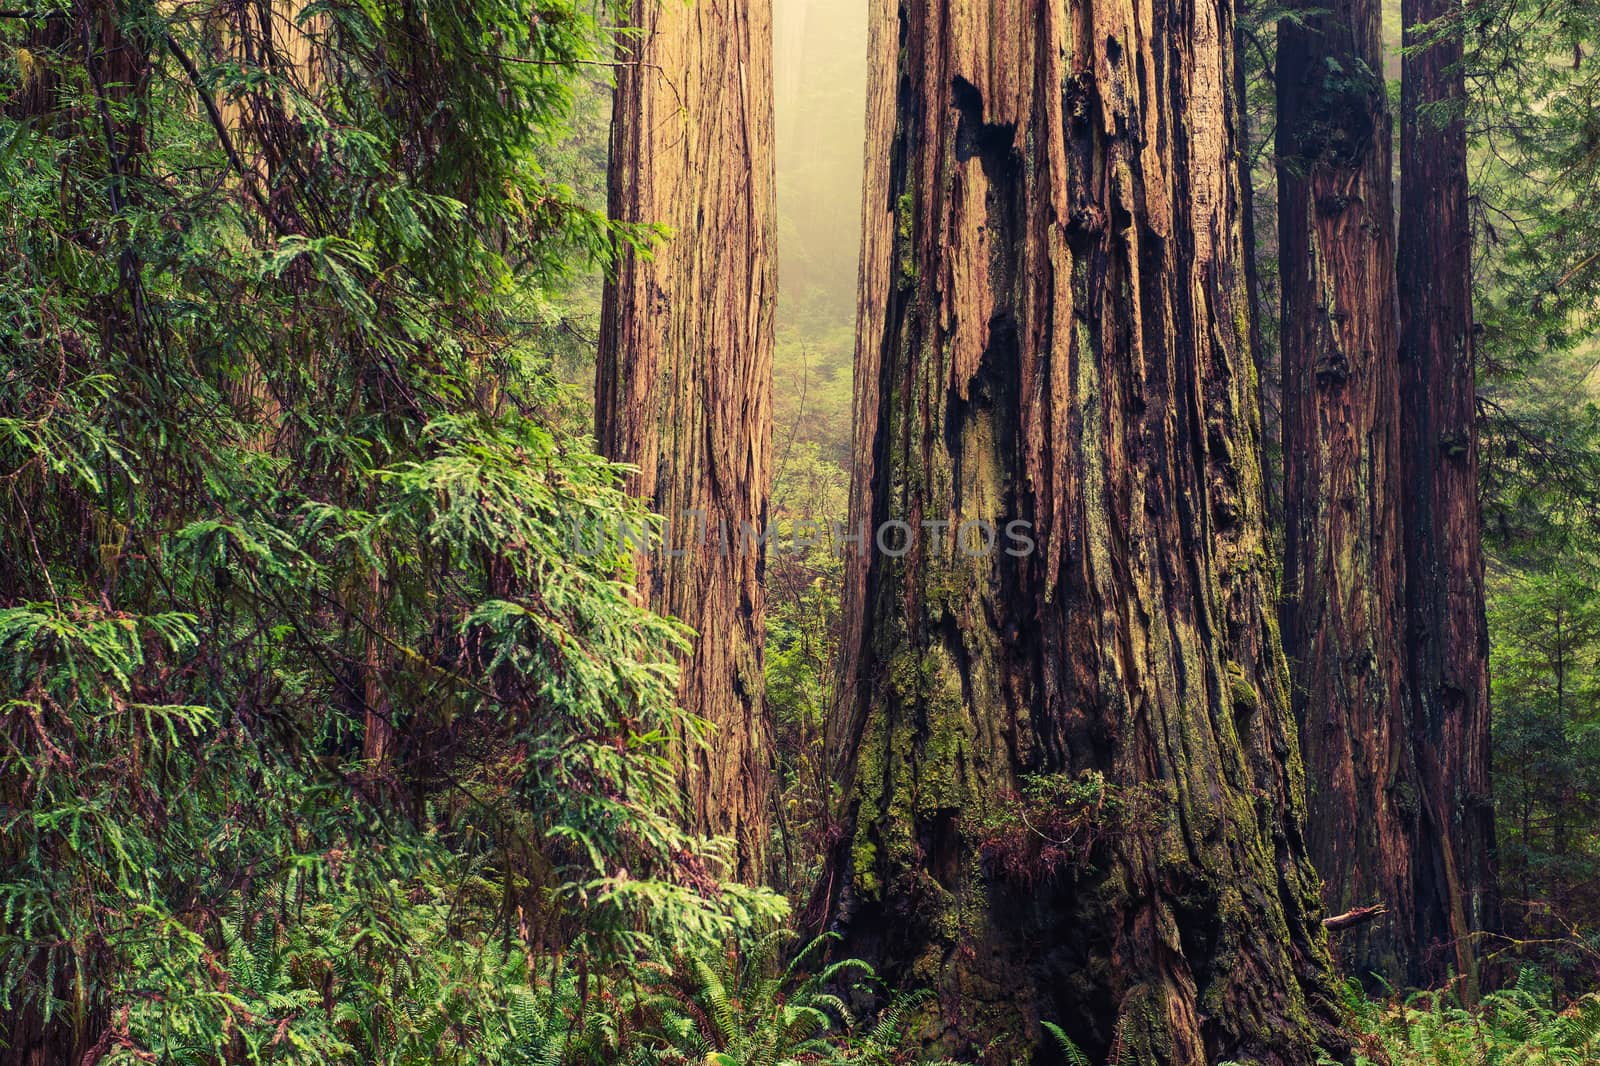 Thousands of Years Old Redwood Trees in California Redwood Forest.